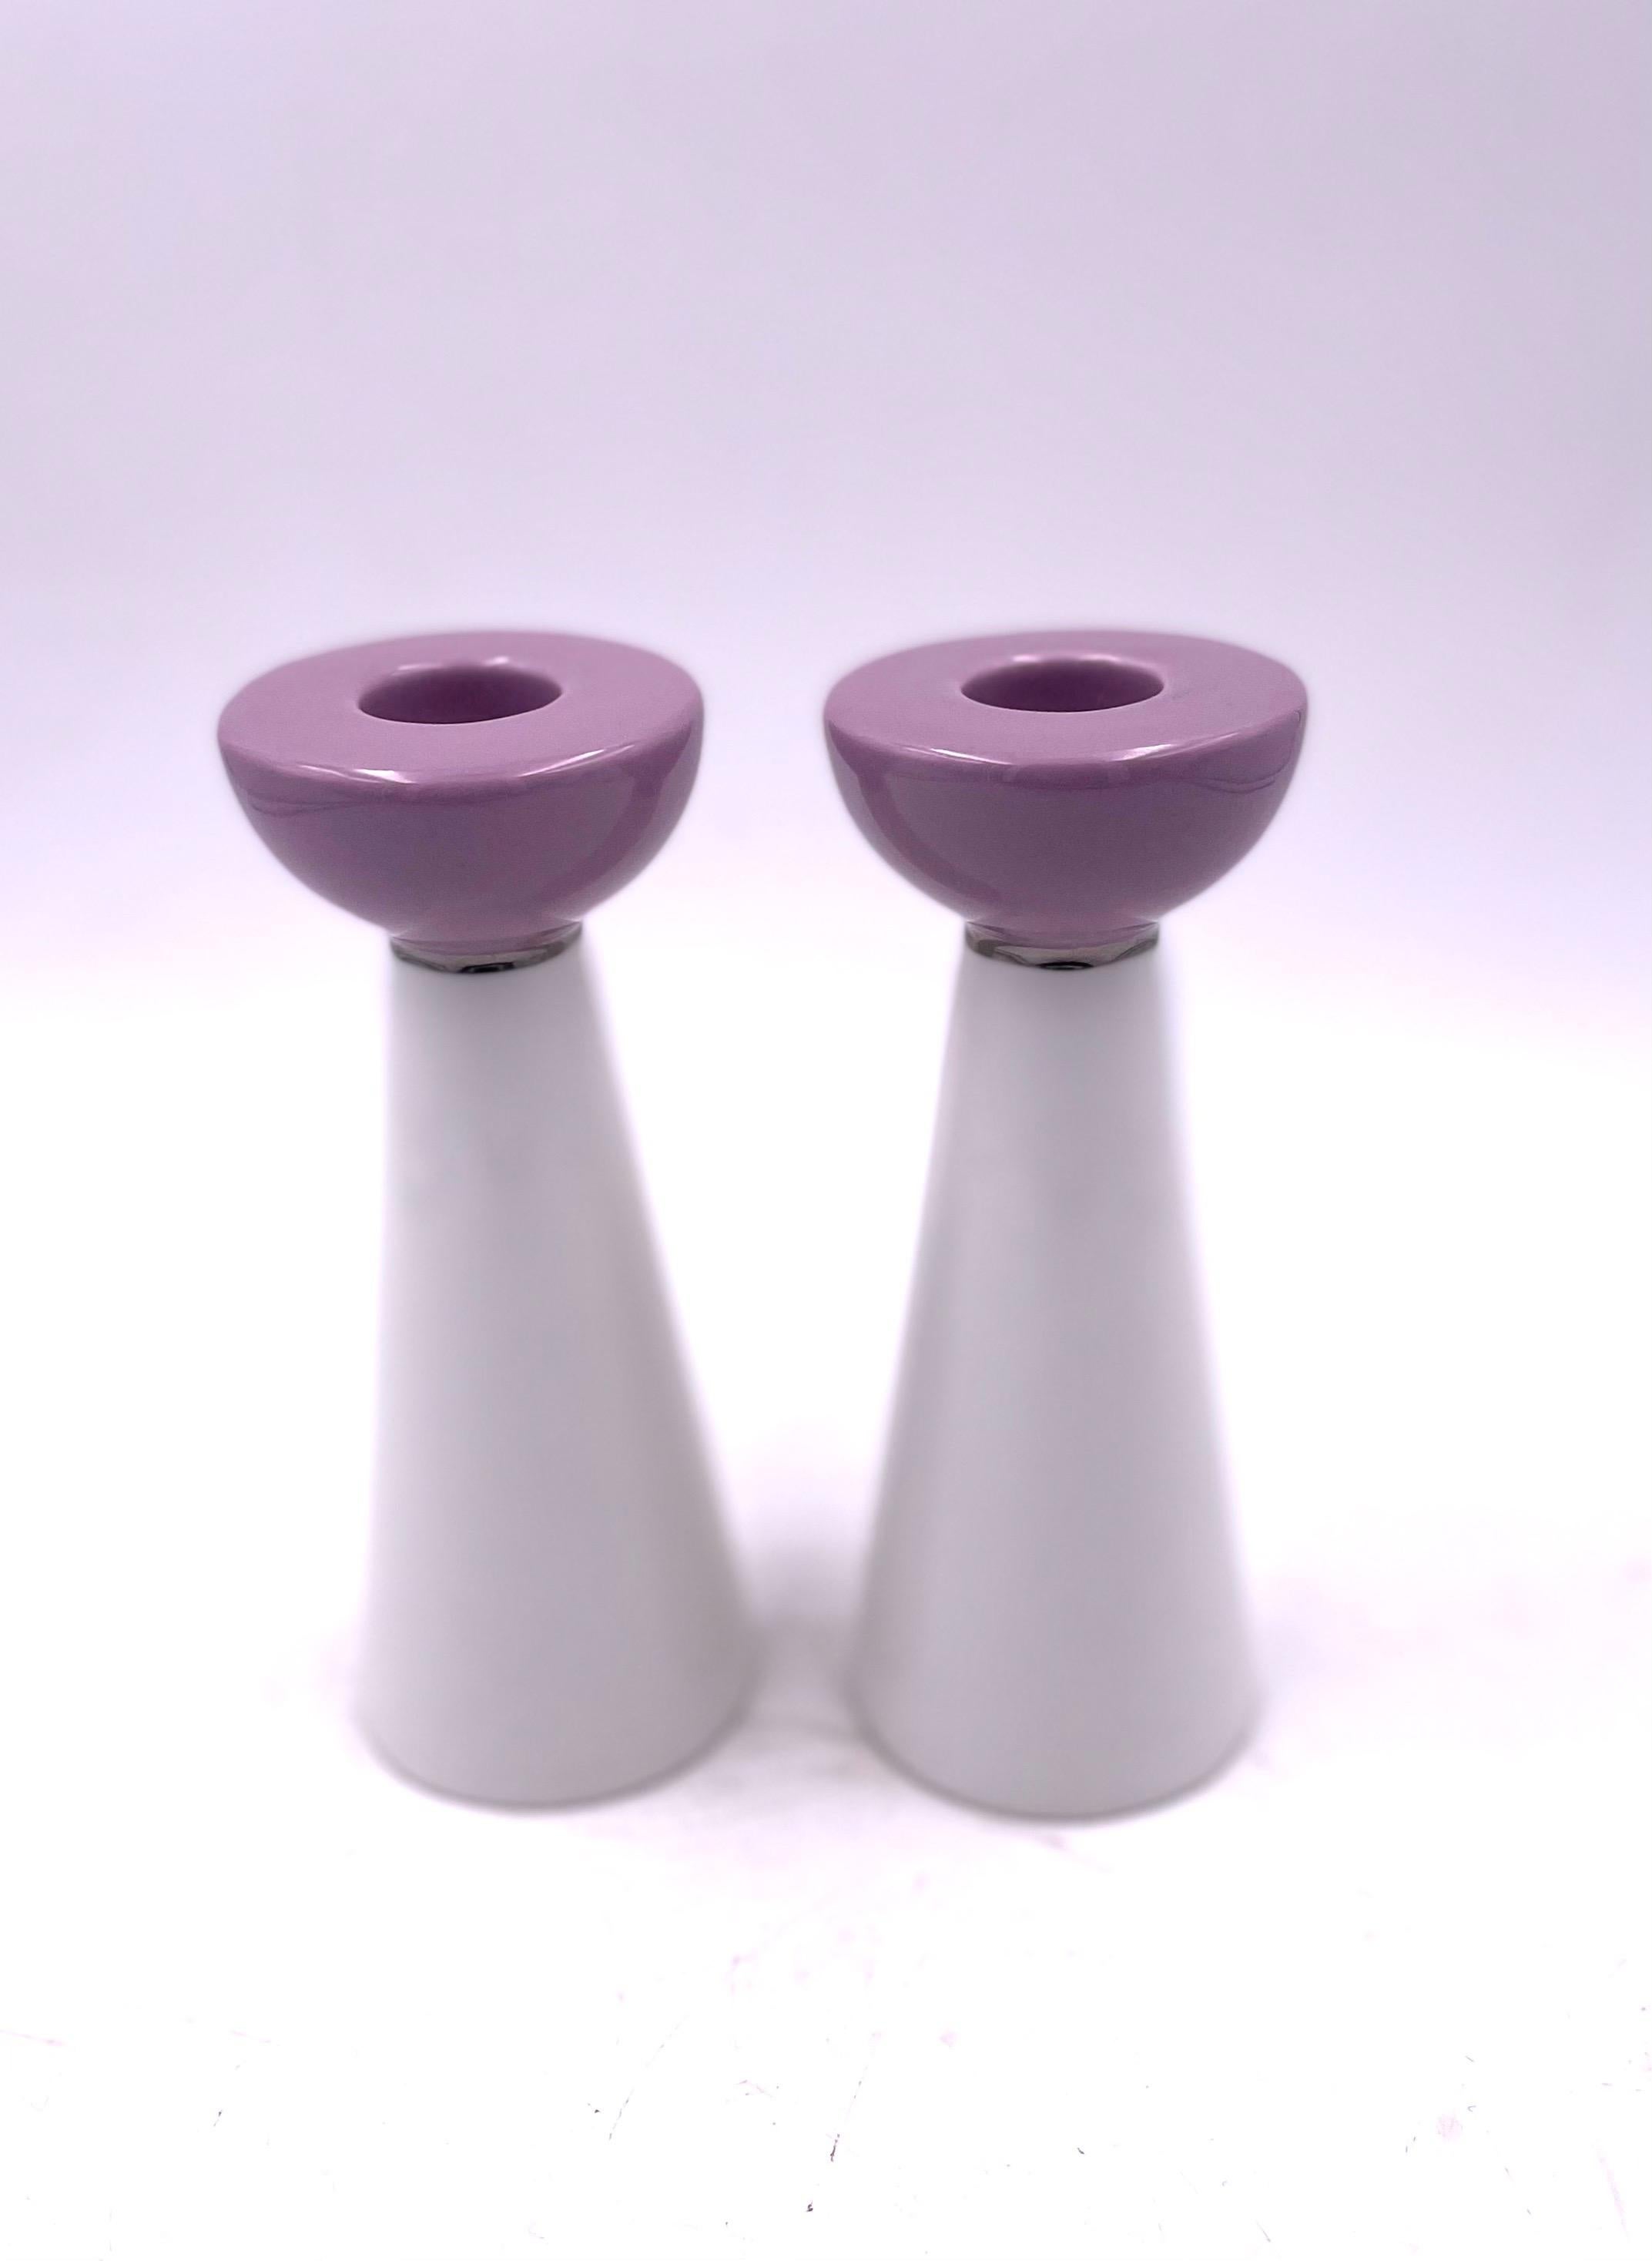 Pair of porcelain postmodern style candle holders, beautiful colors with silver edge accent by Kate Spade for Lenox.